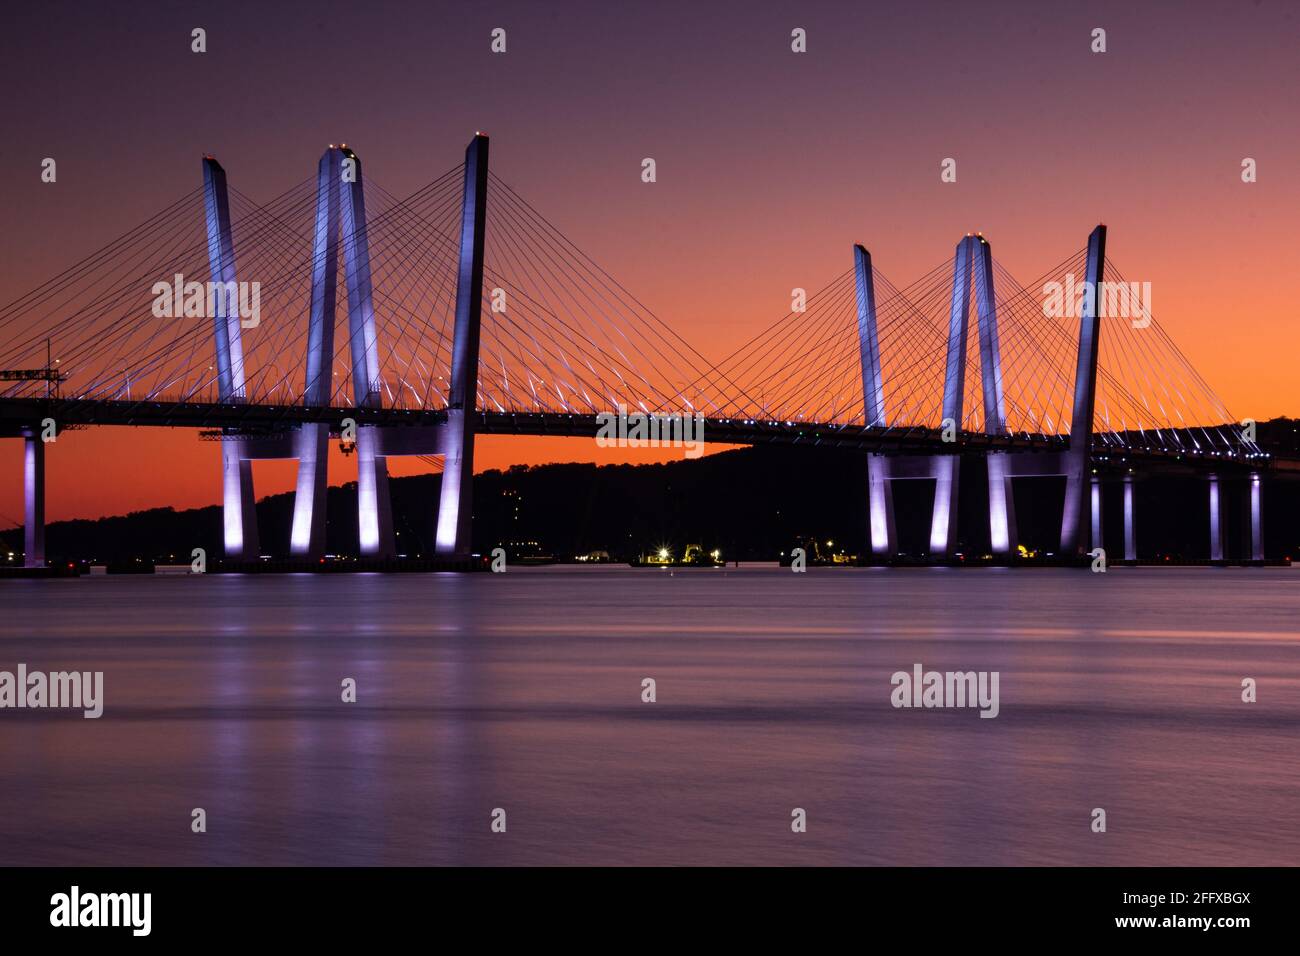 Tarrytown, NY / United States - Sept. 19, 2019: A sunset view of the Tappan Zee Bridge Stock Photo